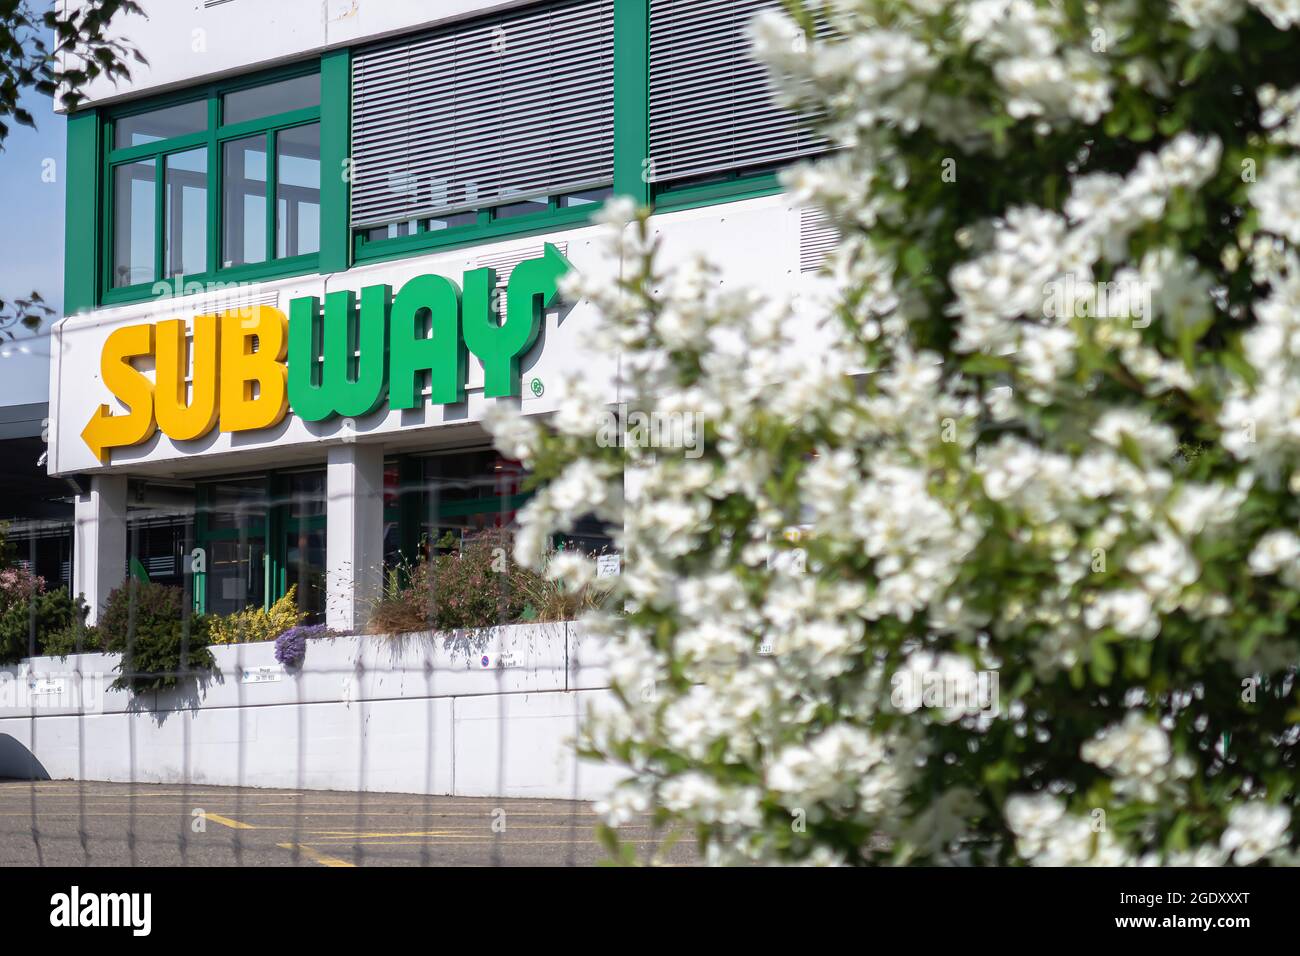 DIETLIKON, SWITZERLAND - APRIL 17, 2020: Subway is an American privately held restaurant franchise that primarily sells submarine sandwiches (subs) an Stock Photo